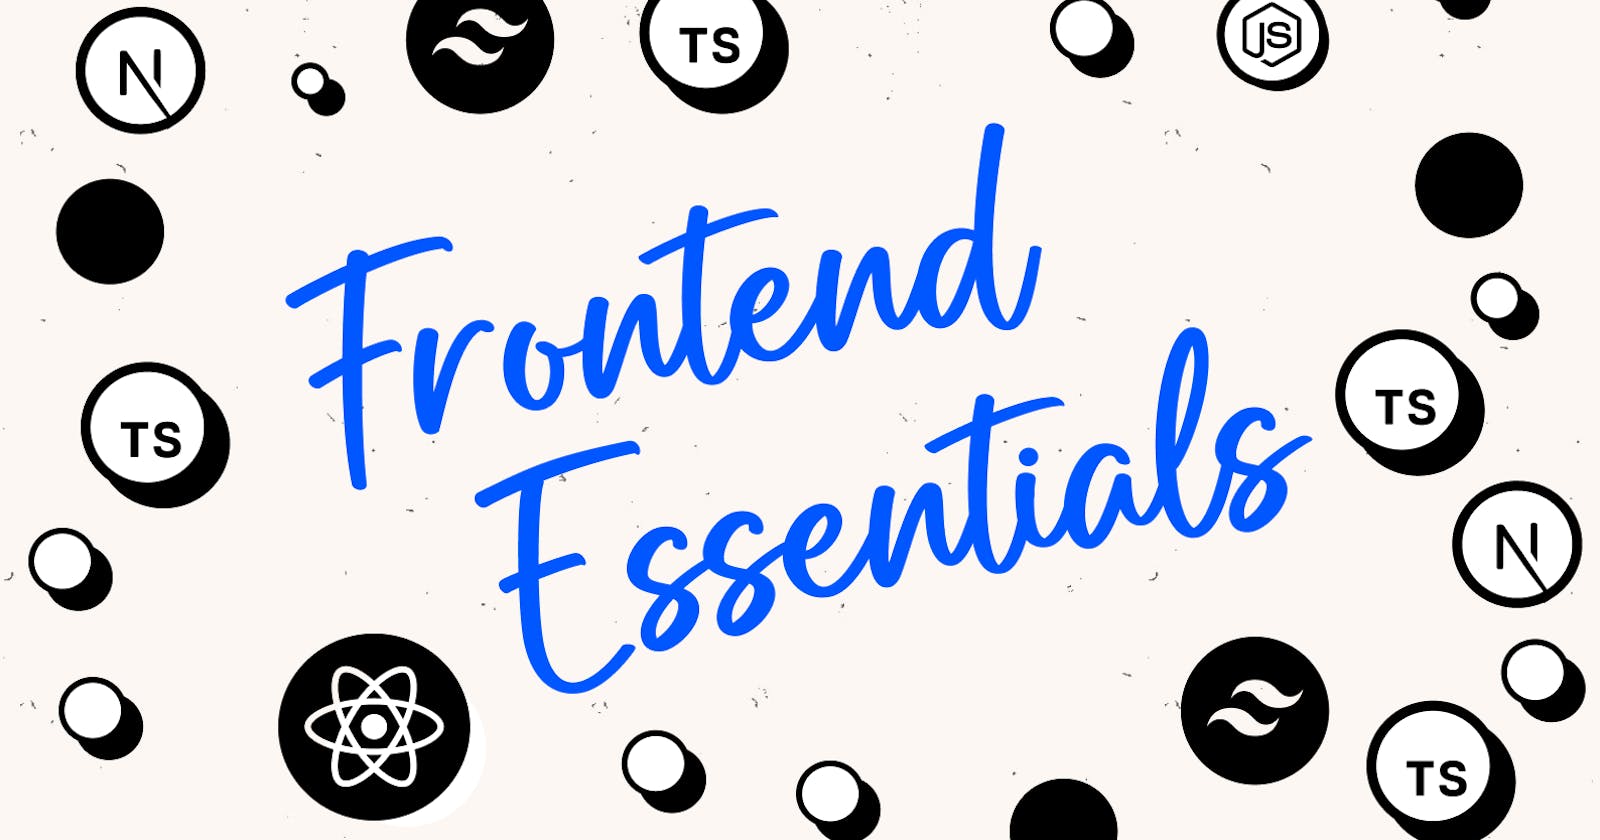 Welcome to Frontend Essentials 👋